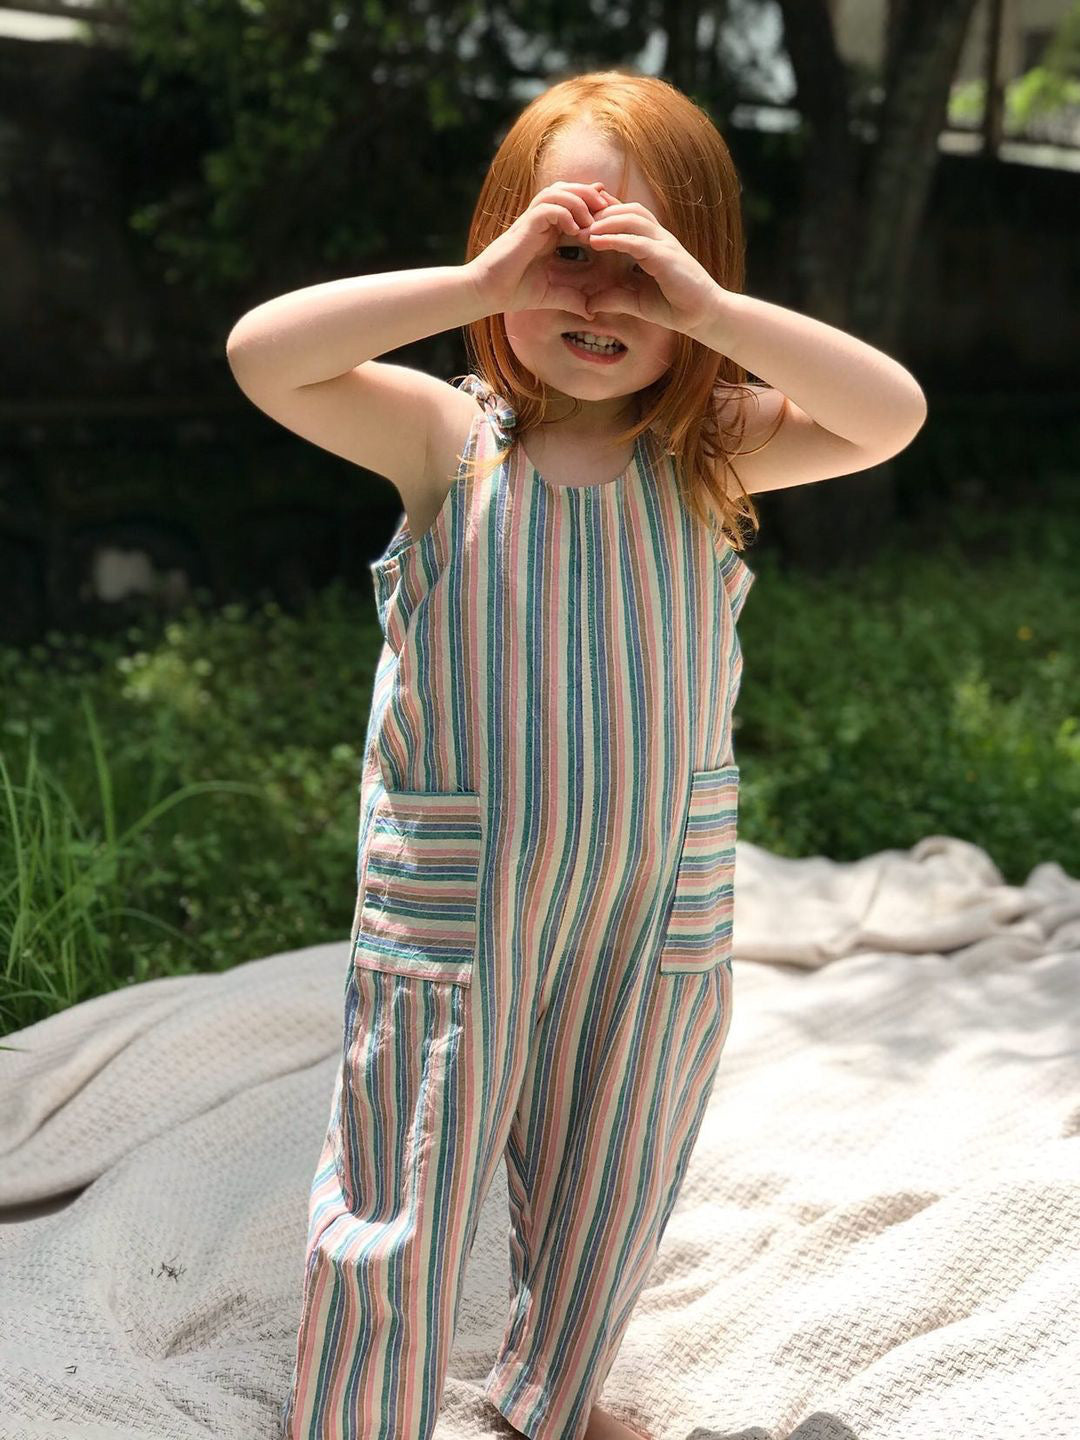 Children love soft, breathable cotton clothes! These Dungarees are made from woven fabrics which are unisex, simple yet cool to wear this summer. Our textiles are woven by inmates here in Nepal that provide an opportunity to generate income and support families back home.